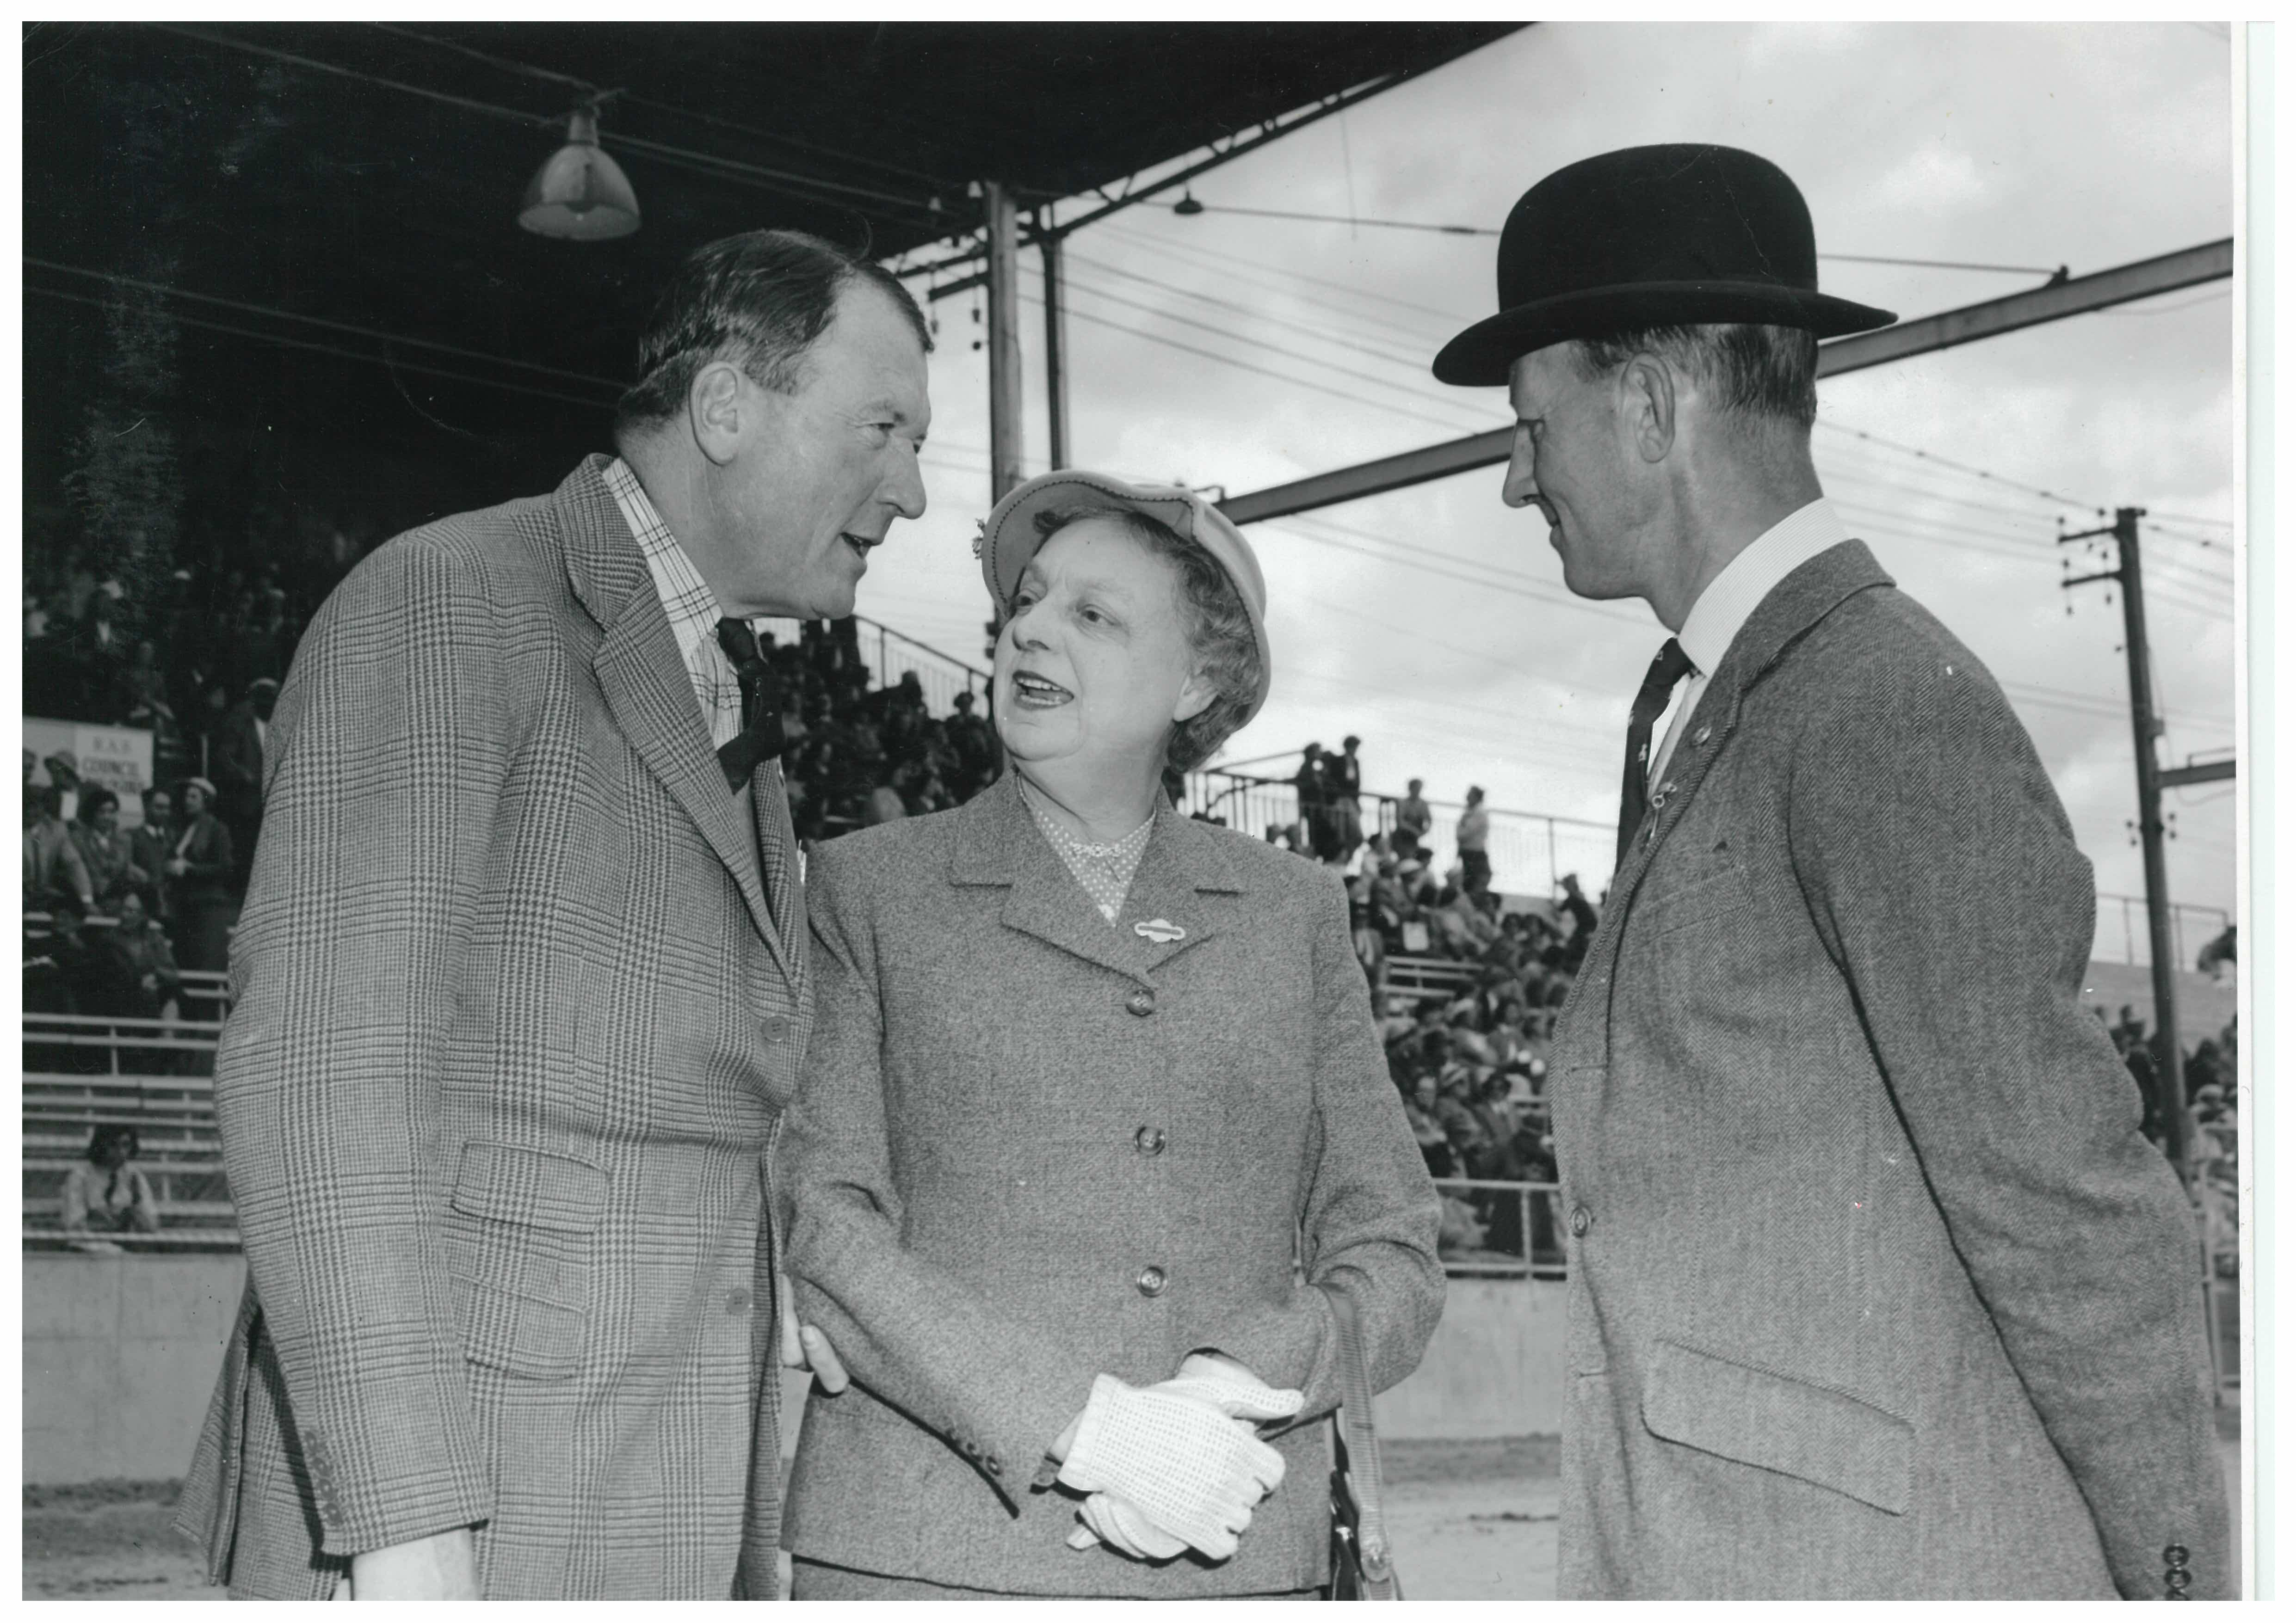 Pictured: Sir Alec Creswick with two judges, 1963. Photo source: Melbourne Royal Heritage Collection.